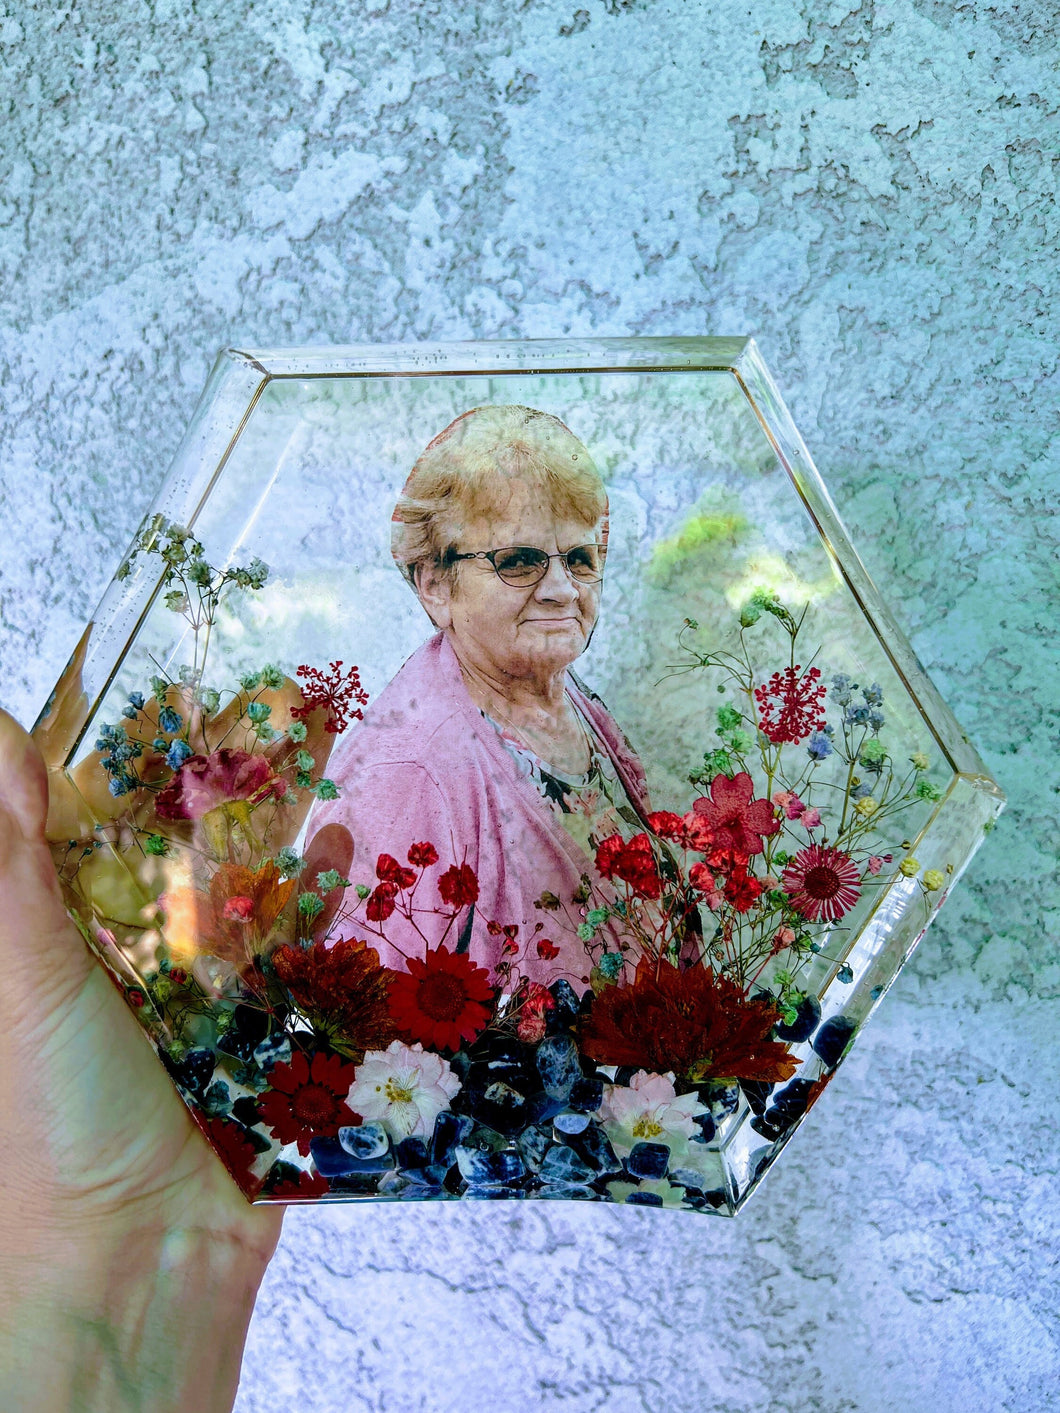 Custom Funeral Flowers Resin Paperweight with your picture Wedding Bridal Flowers Bouquet memories of your wedding anniversary ,funeral